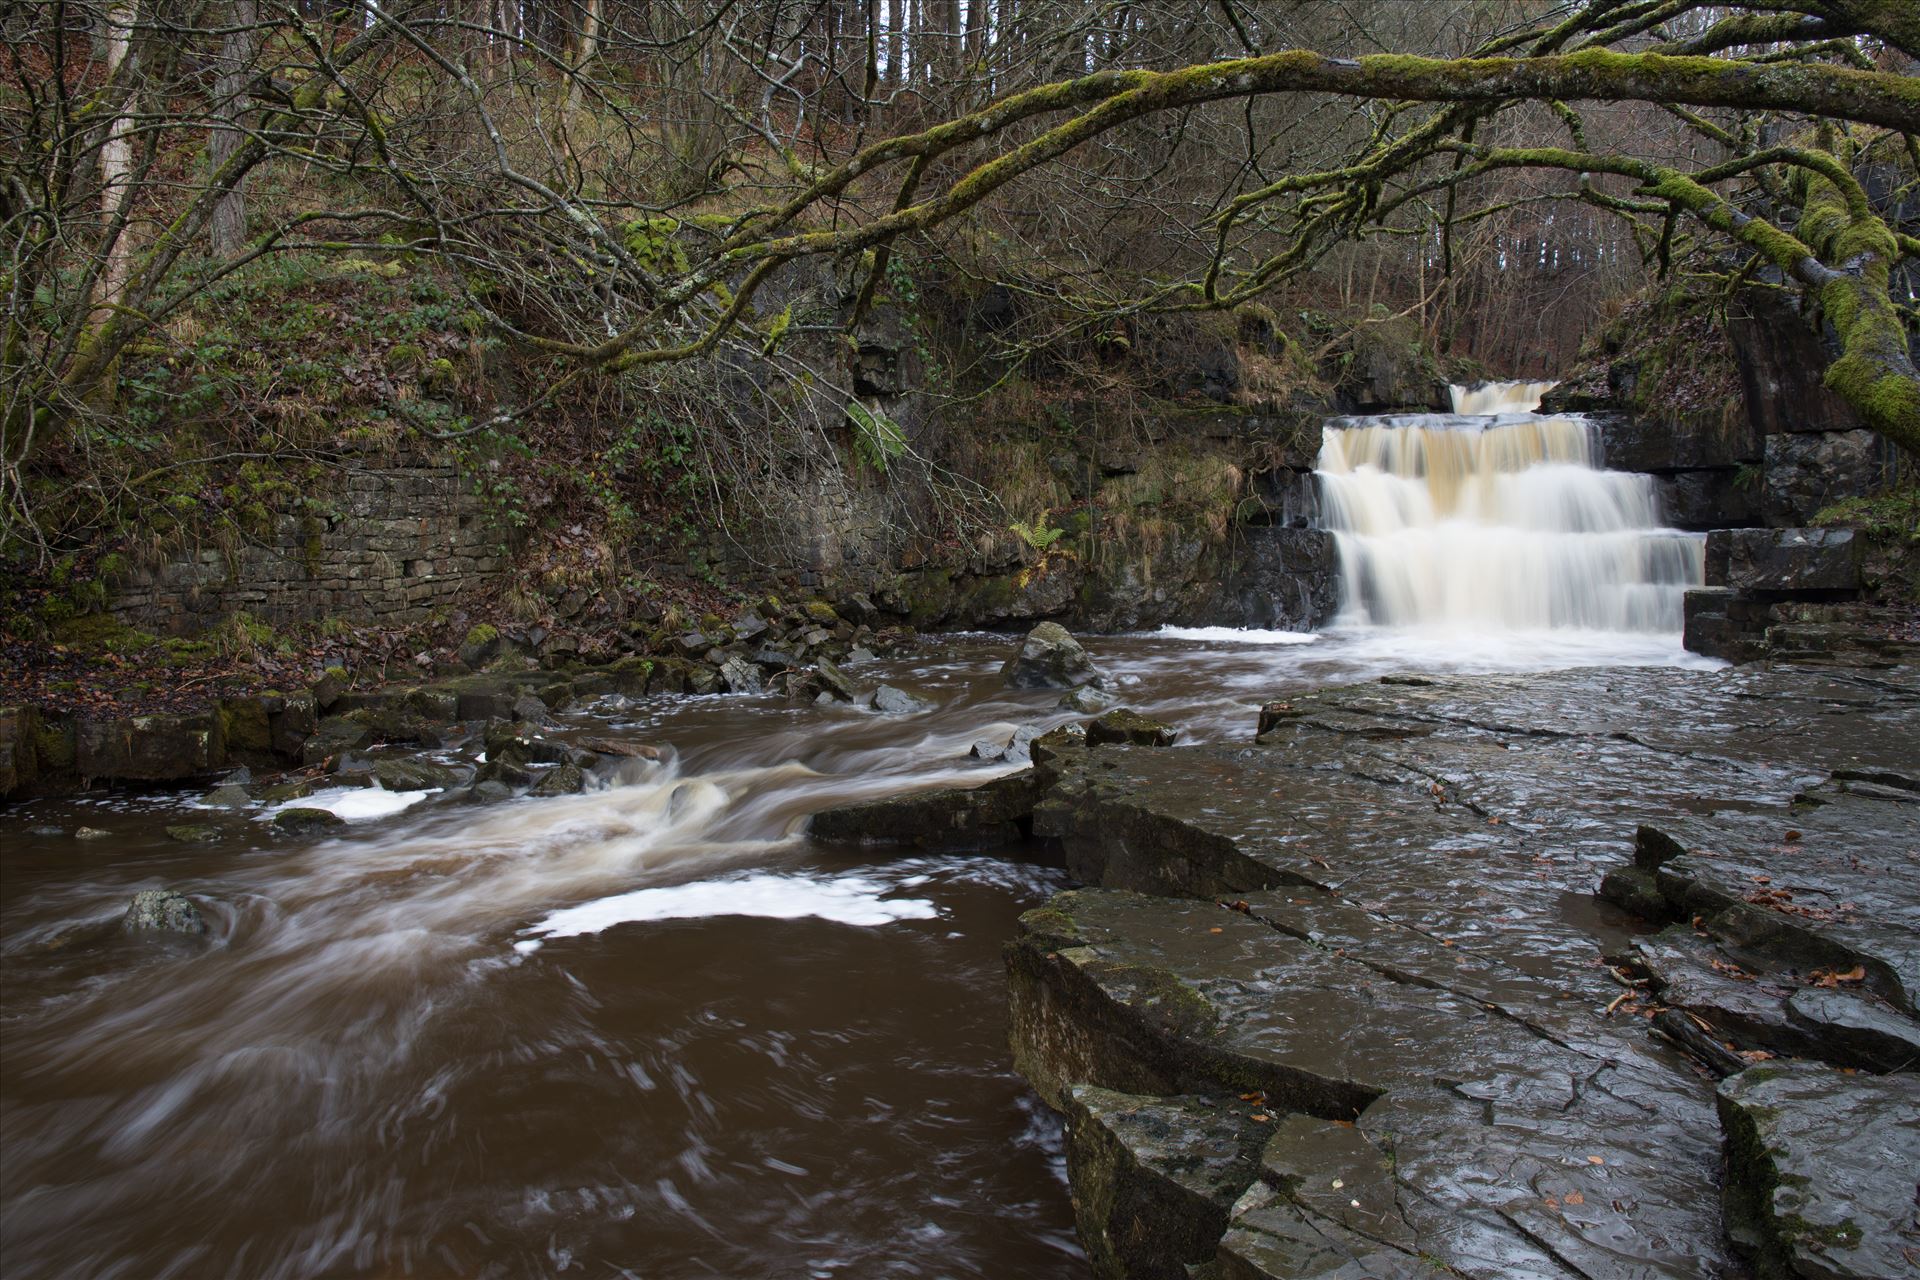 Summerhill Force Summerhill Force is a picturesque waterfall in a wooded glade near Bowlees in Upper Teesdale. by philreay